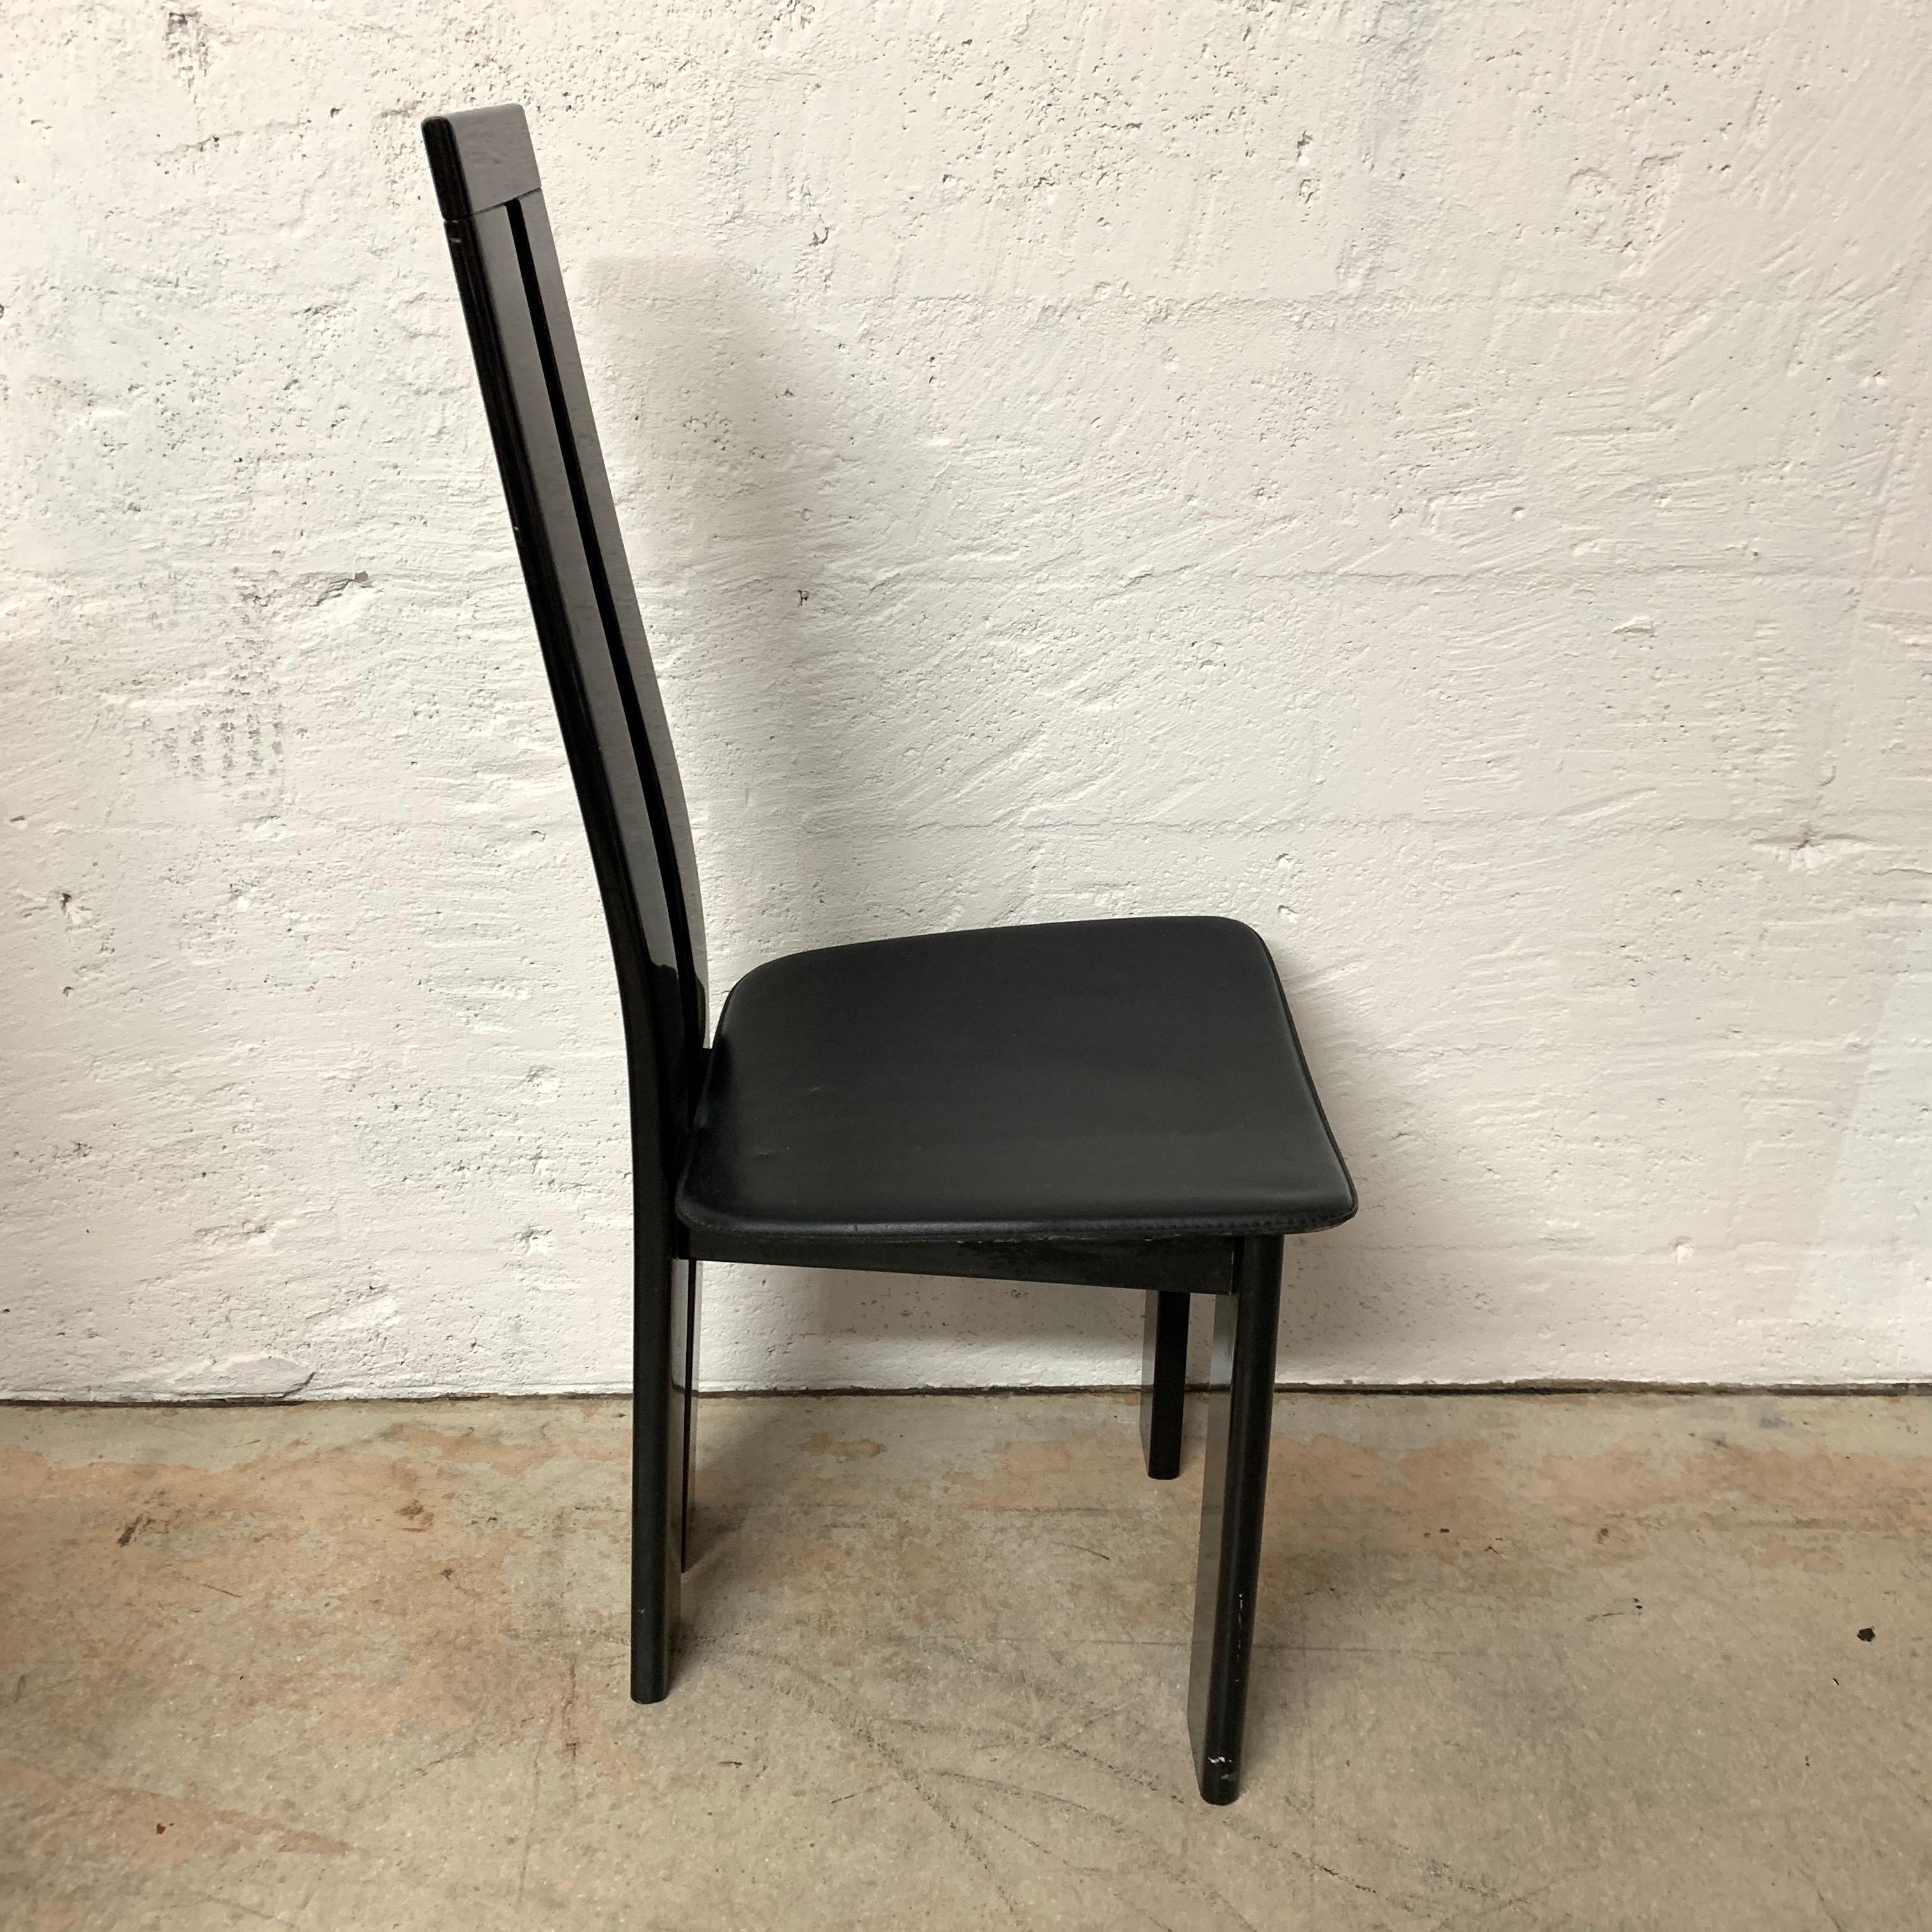 20th Century Pair of Italian Postmodern Chairs by Massimo Vignelli